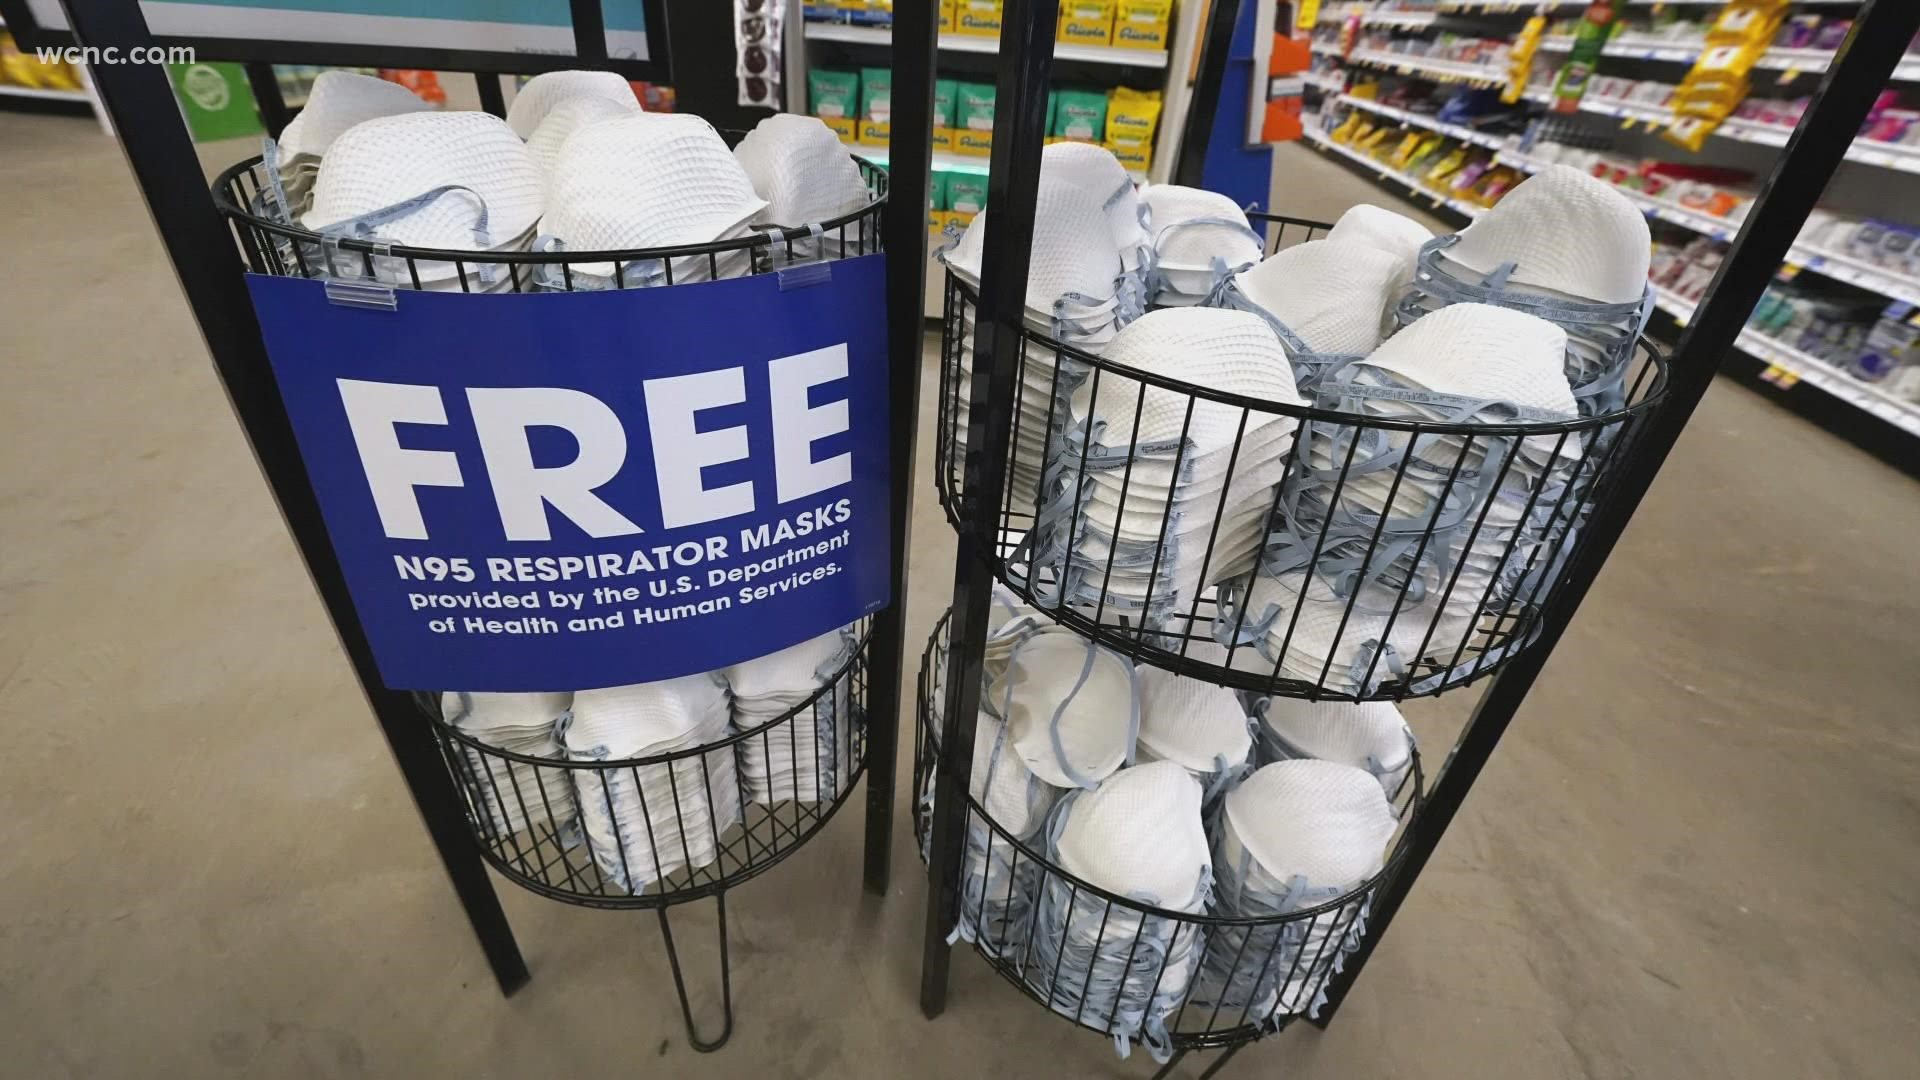 Pharmacies and health centers across the Carolinas have been giving out free N95 masks from the federal government.